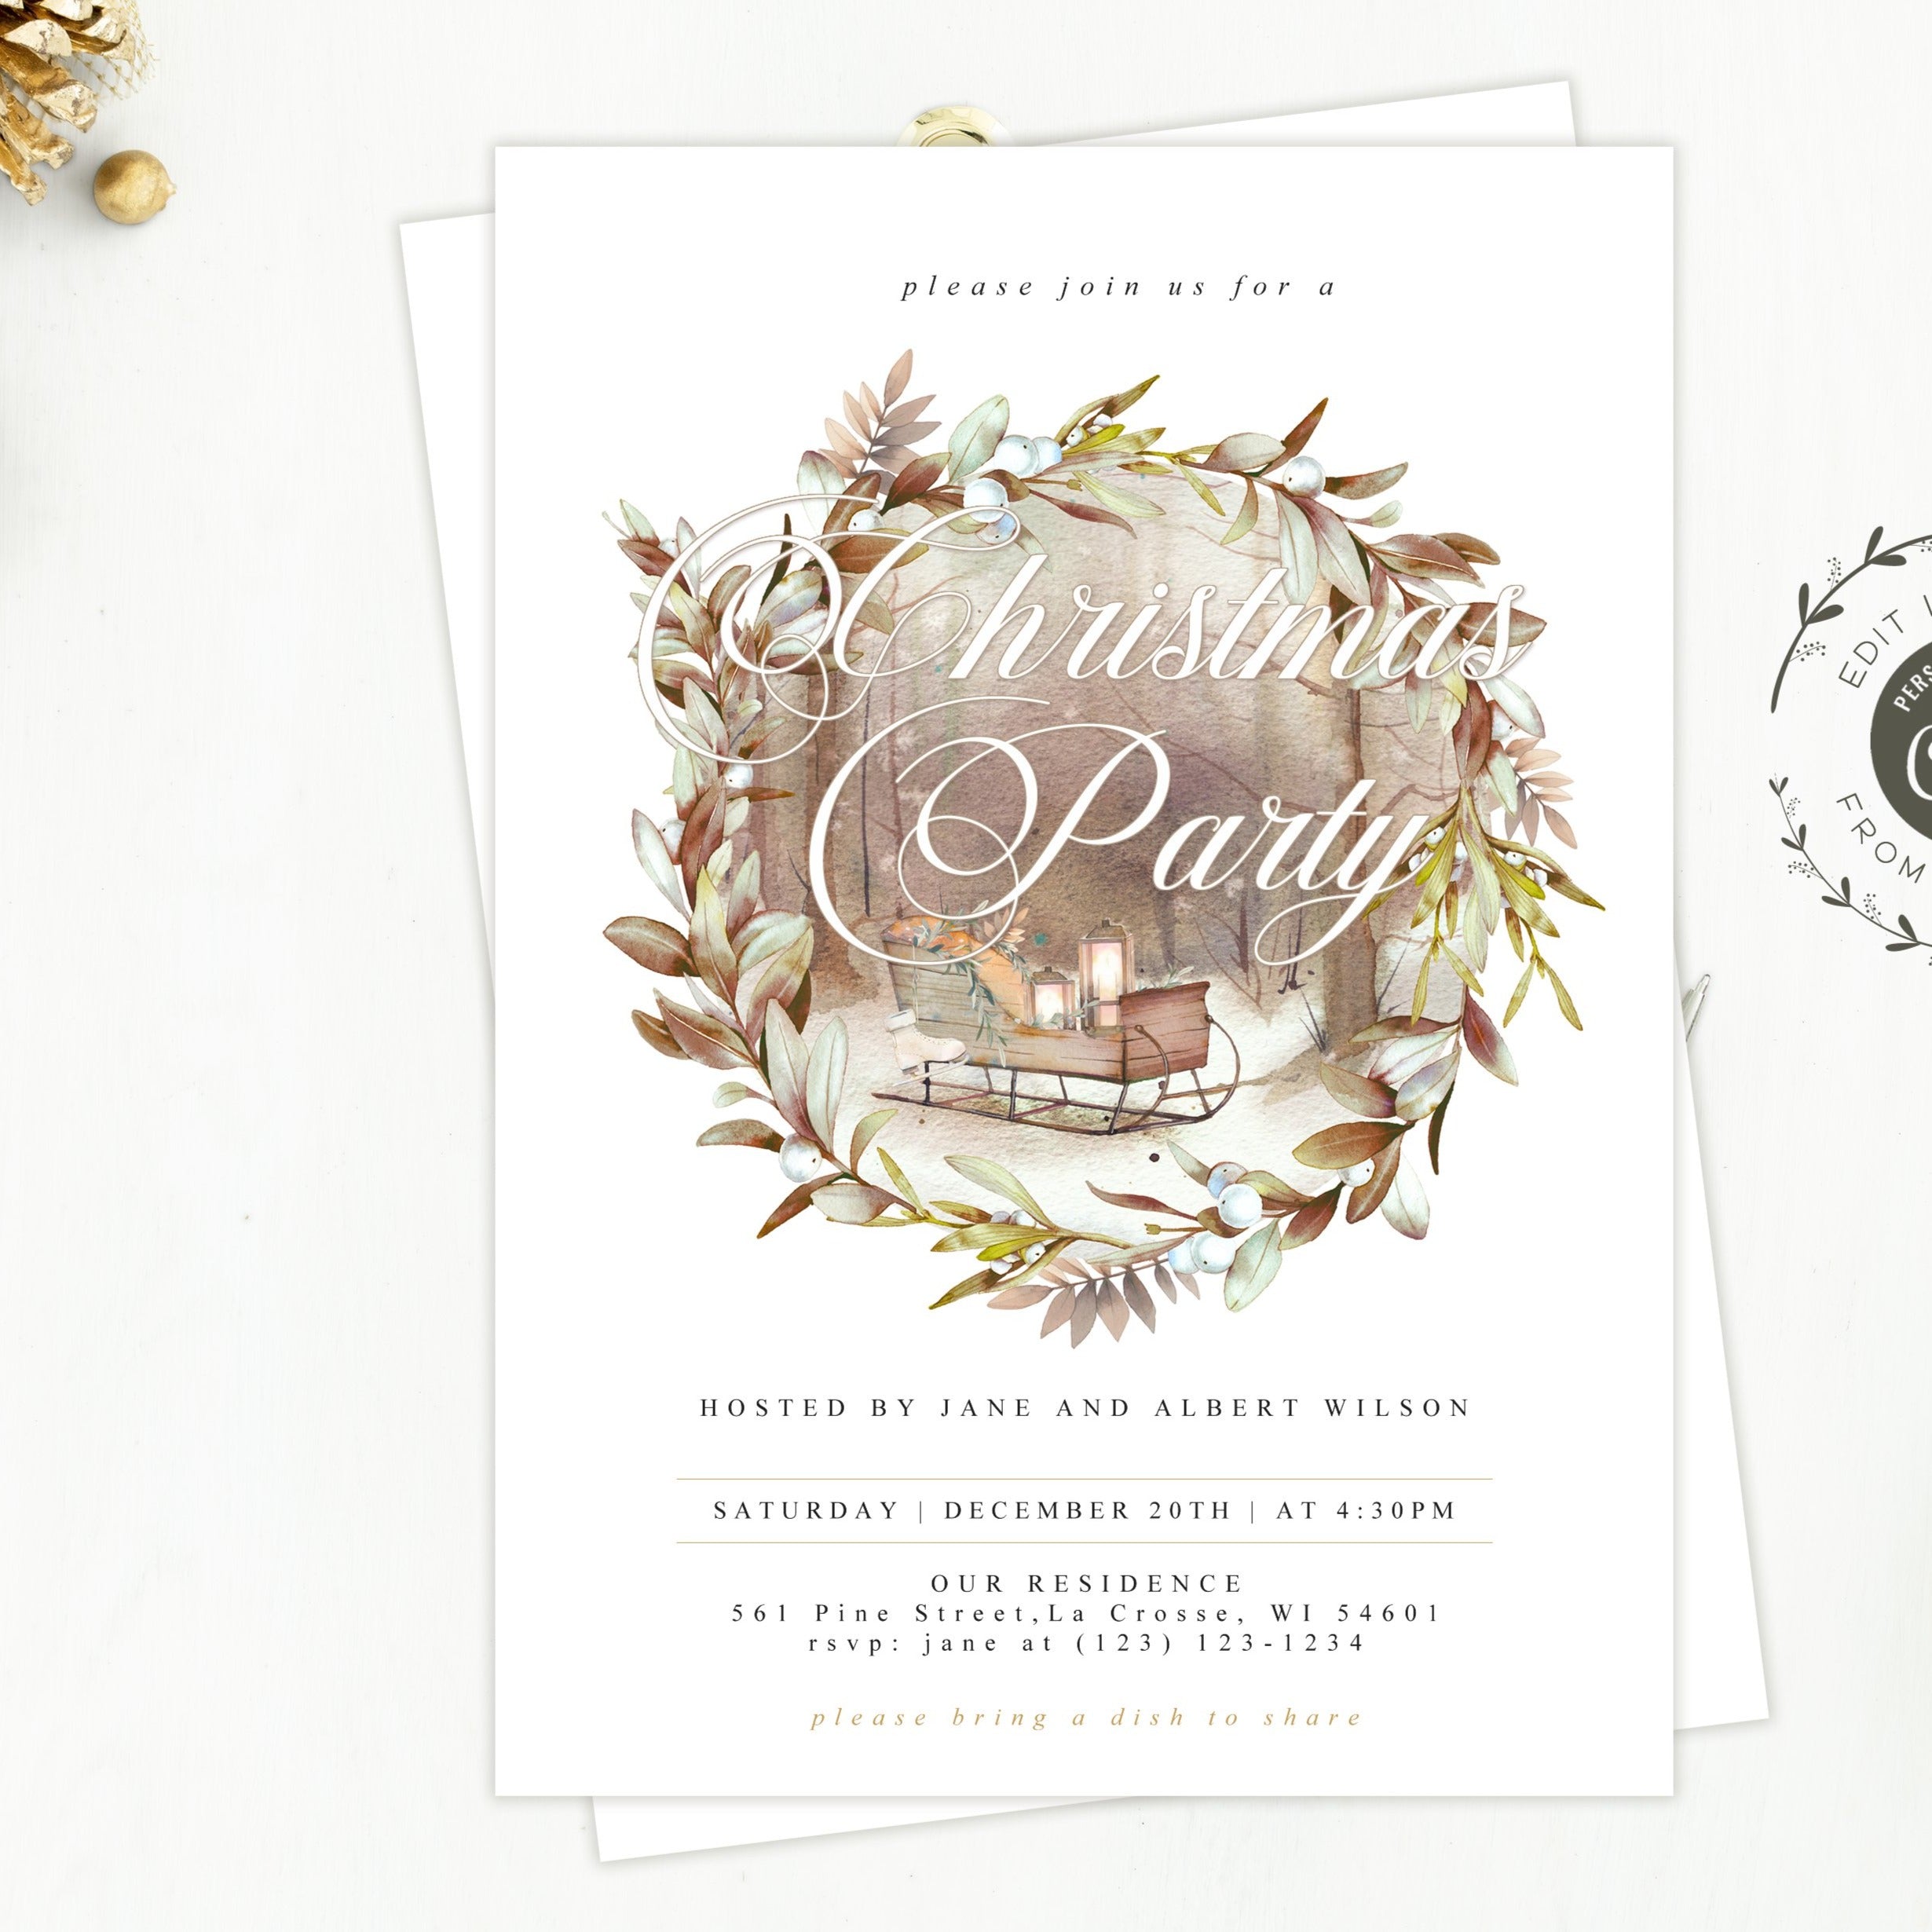 vintage holiday party invitations